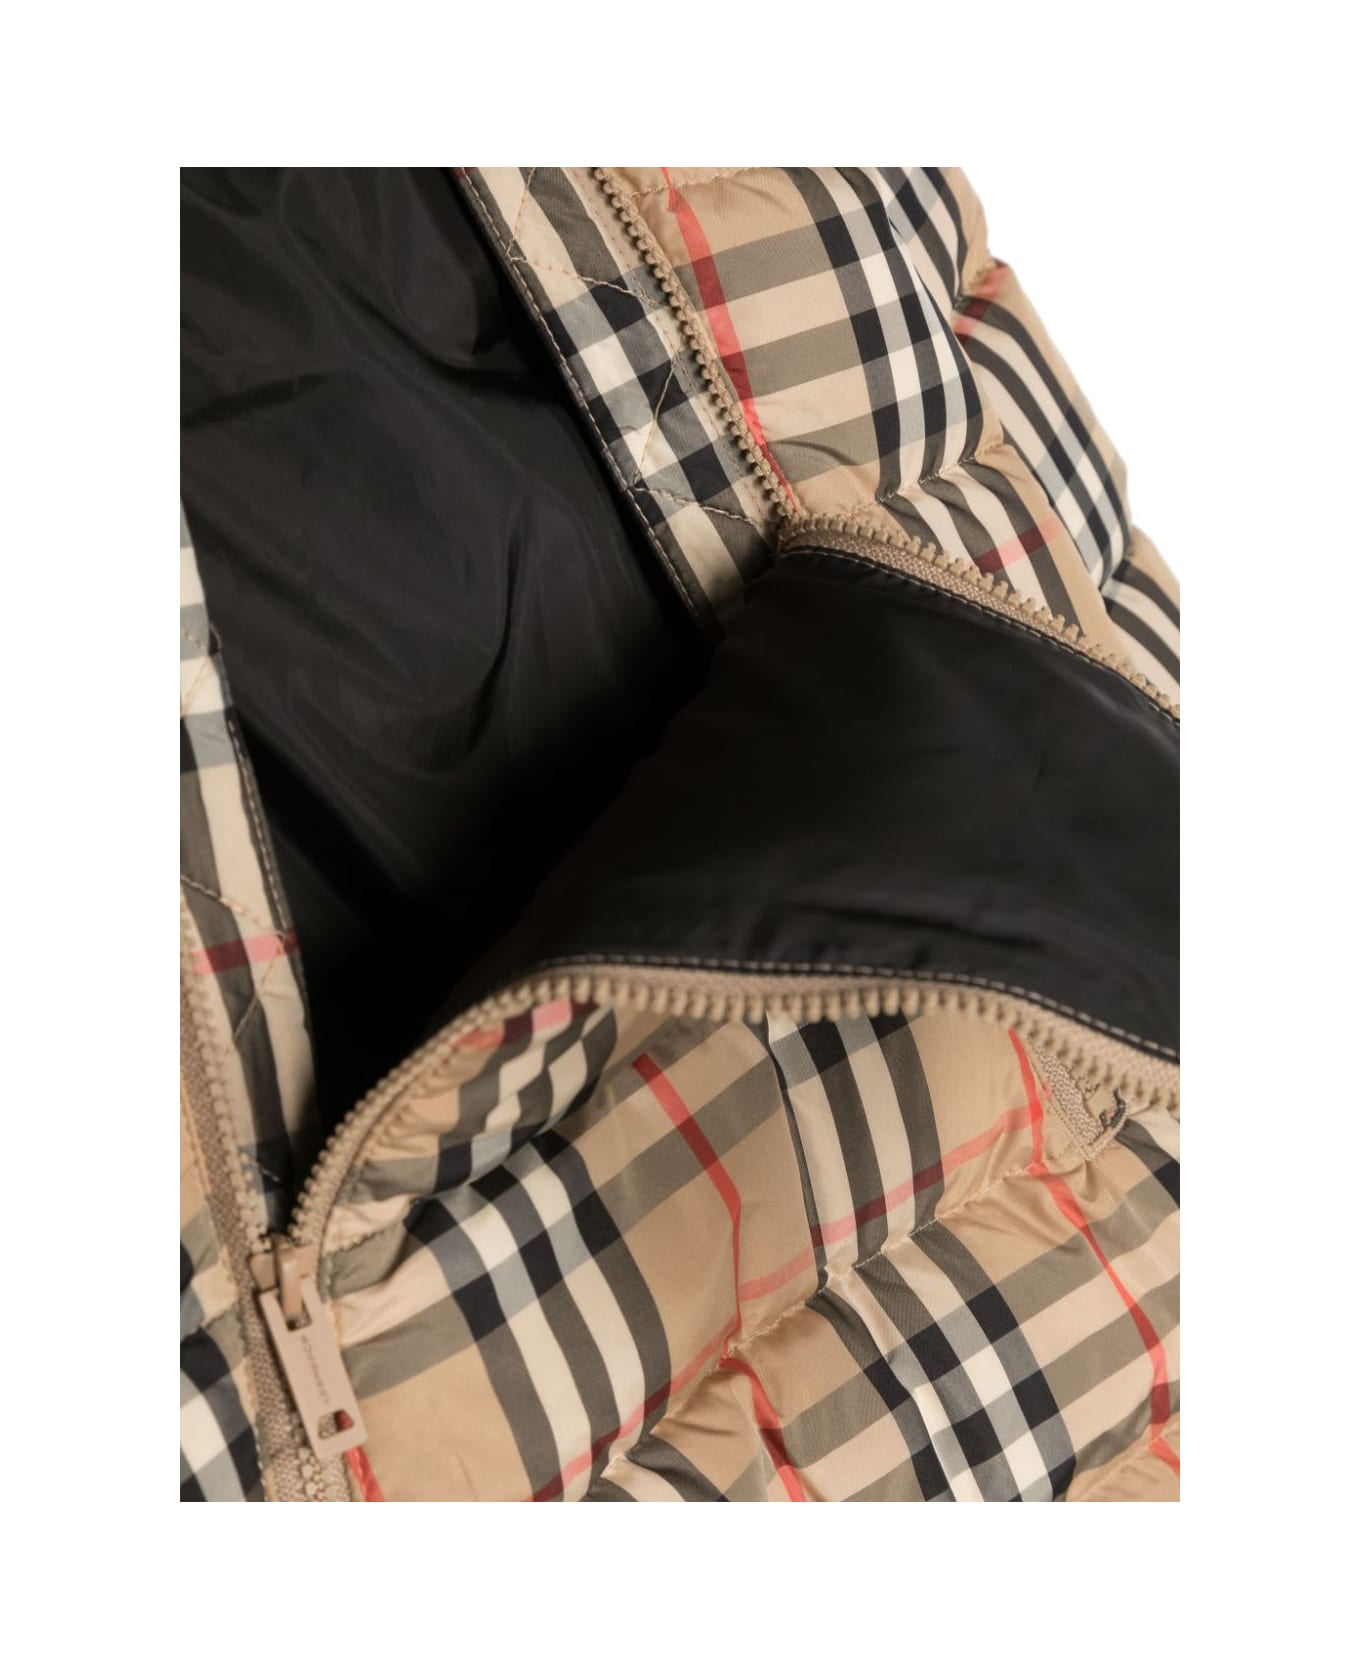 Burberry Rollo Checked Baby Body - Archive Beige Ip Chk